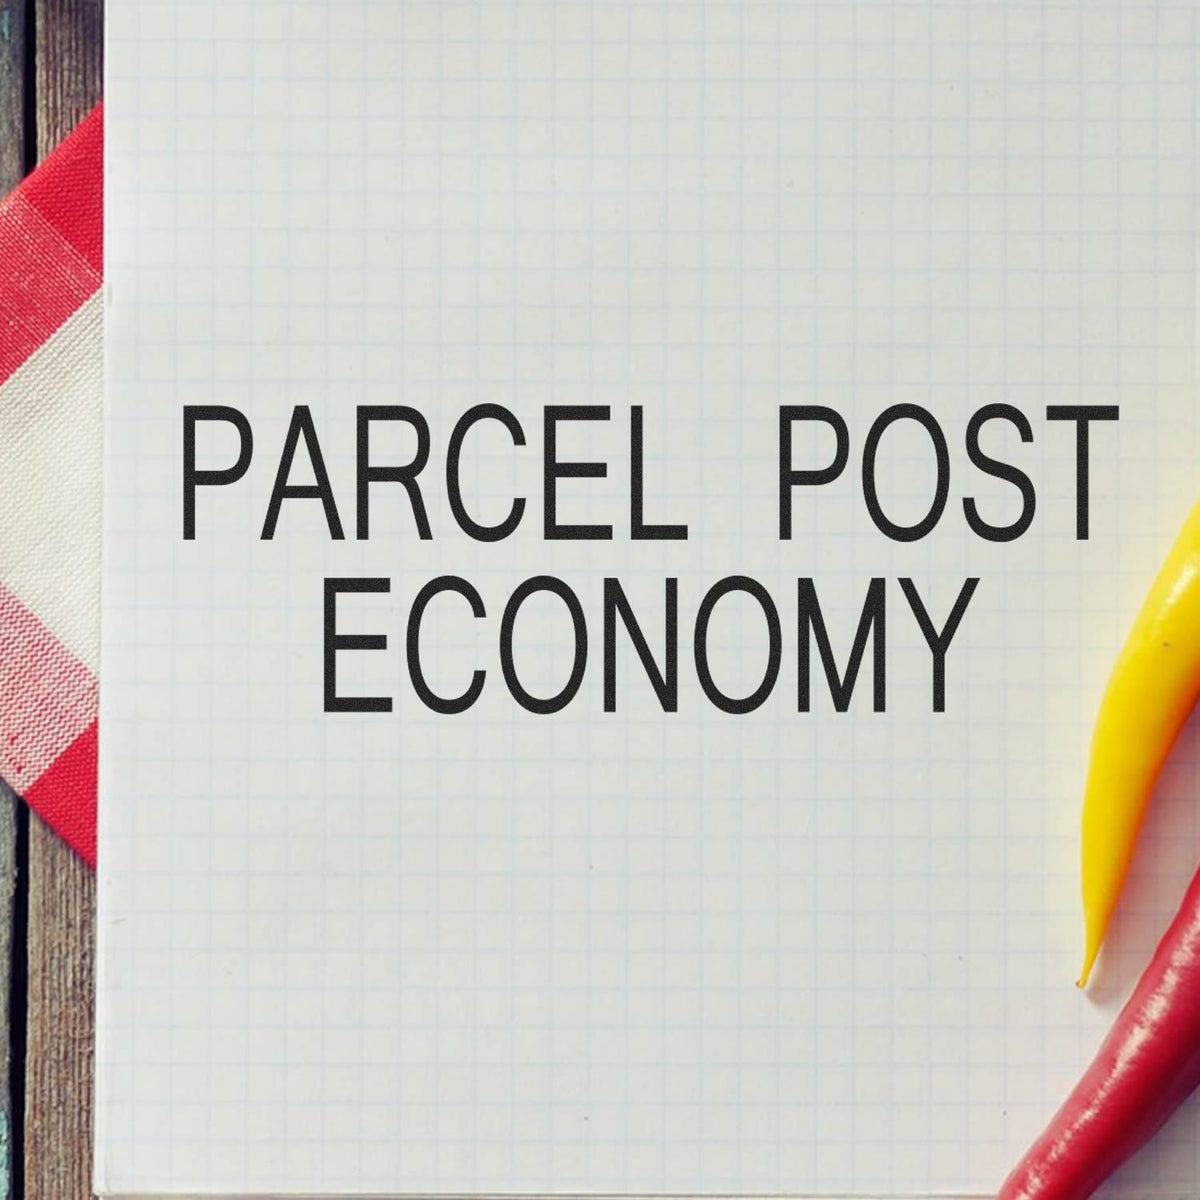 Large Parcel Post Economy Rubber Stamp Lifestyle Photo